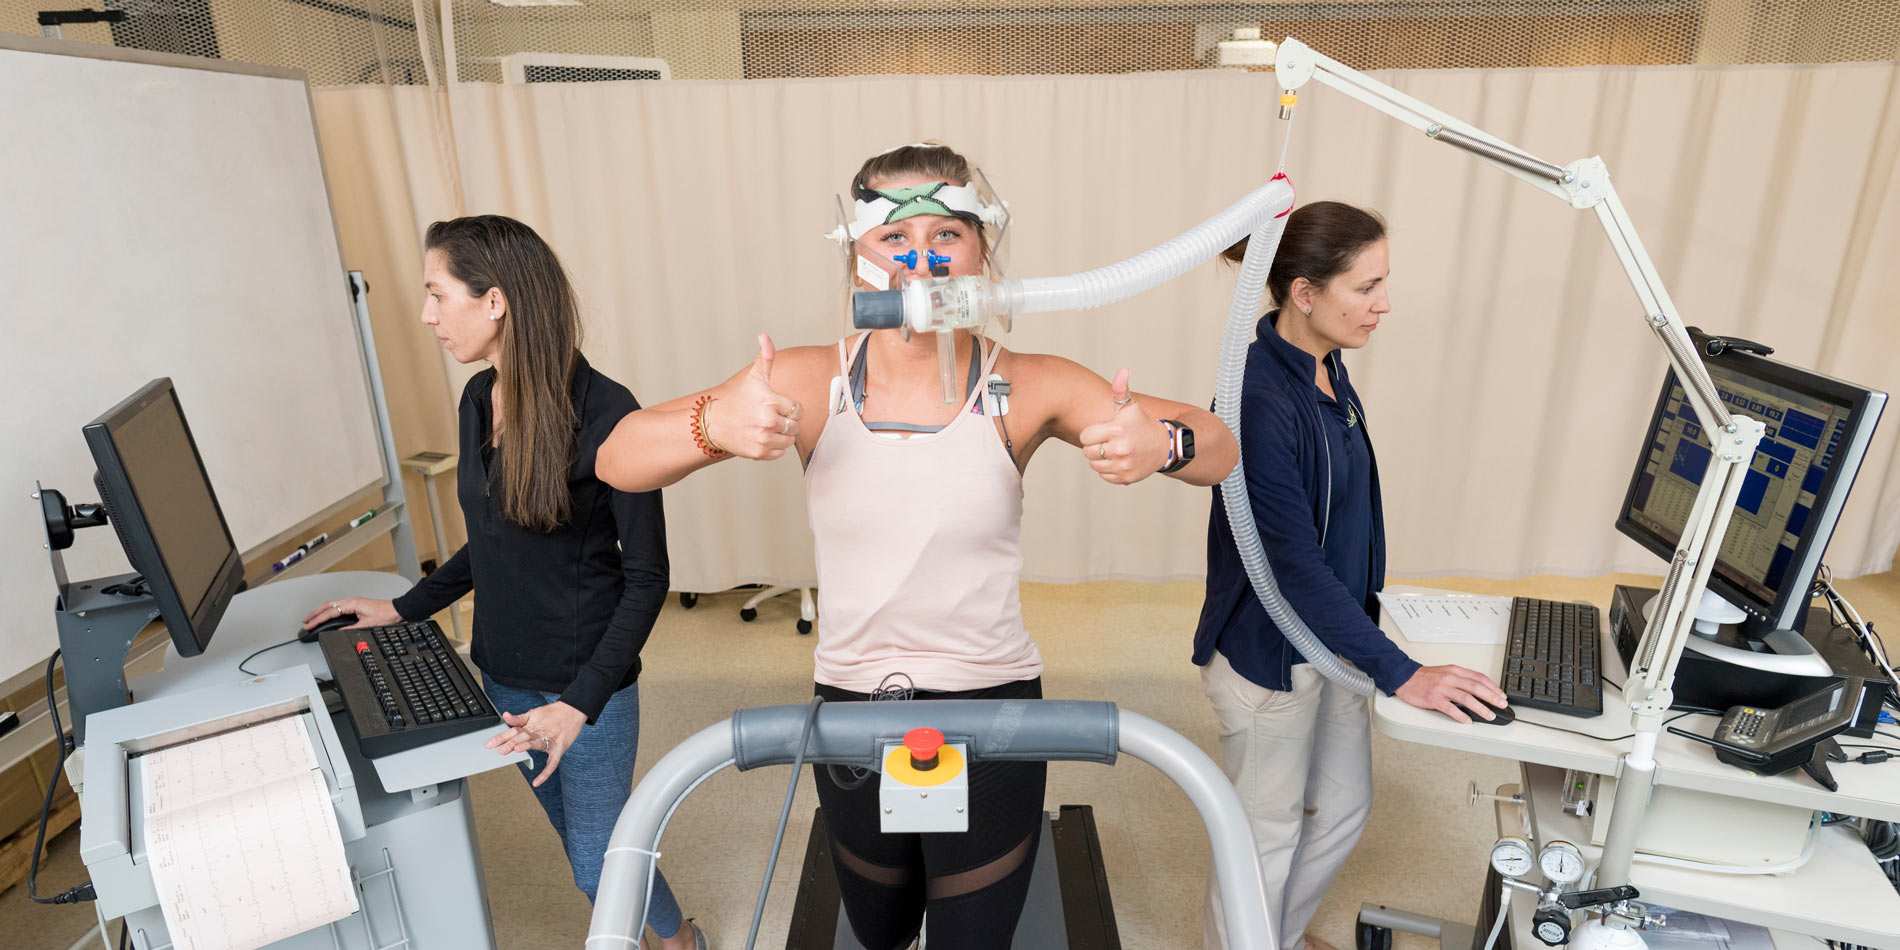 A student shows off technology in the SHAHS Exercise Science Lab